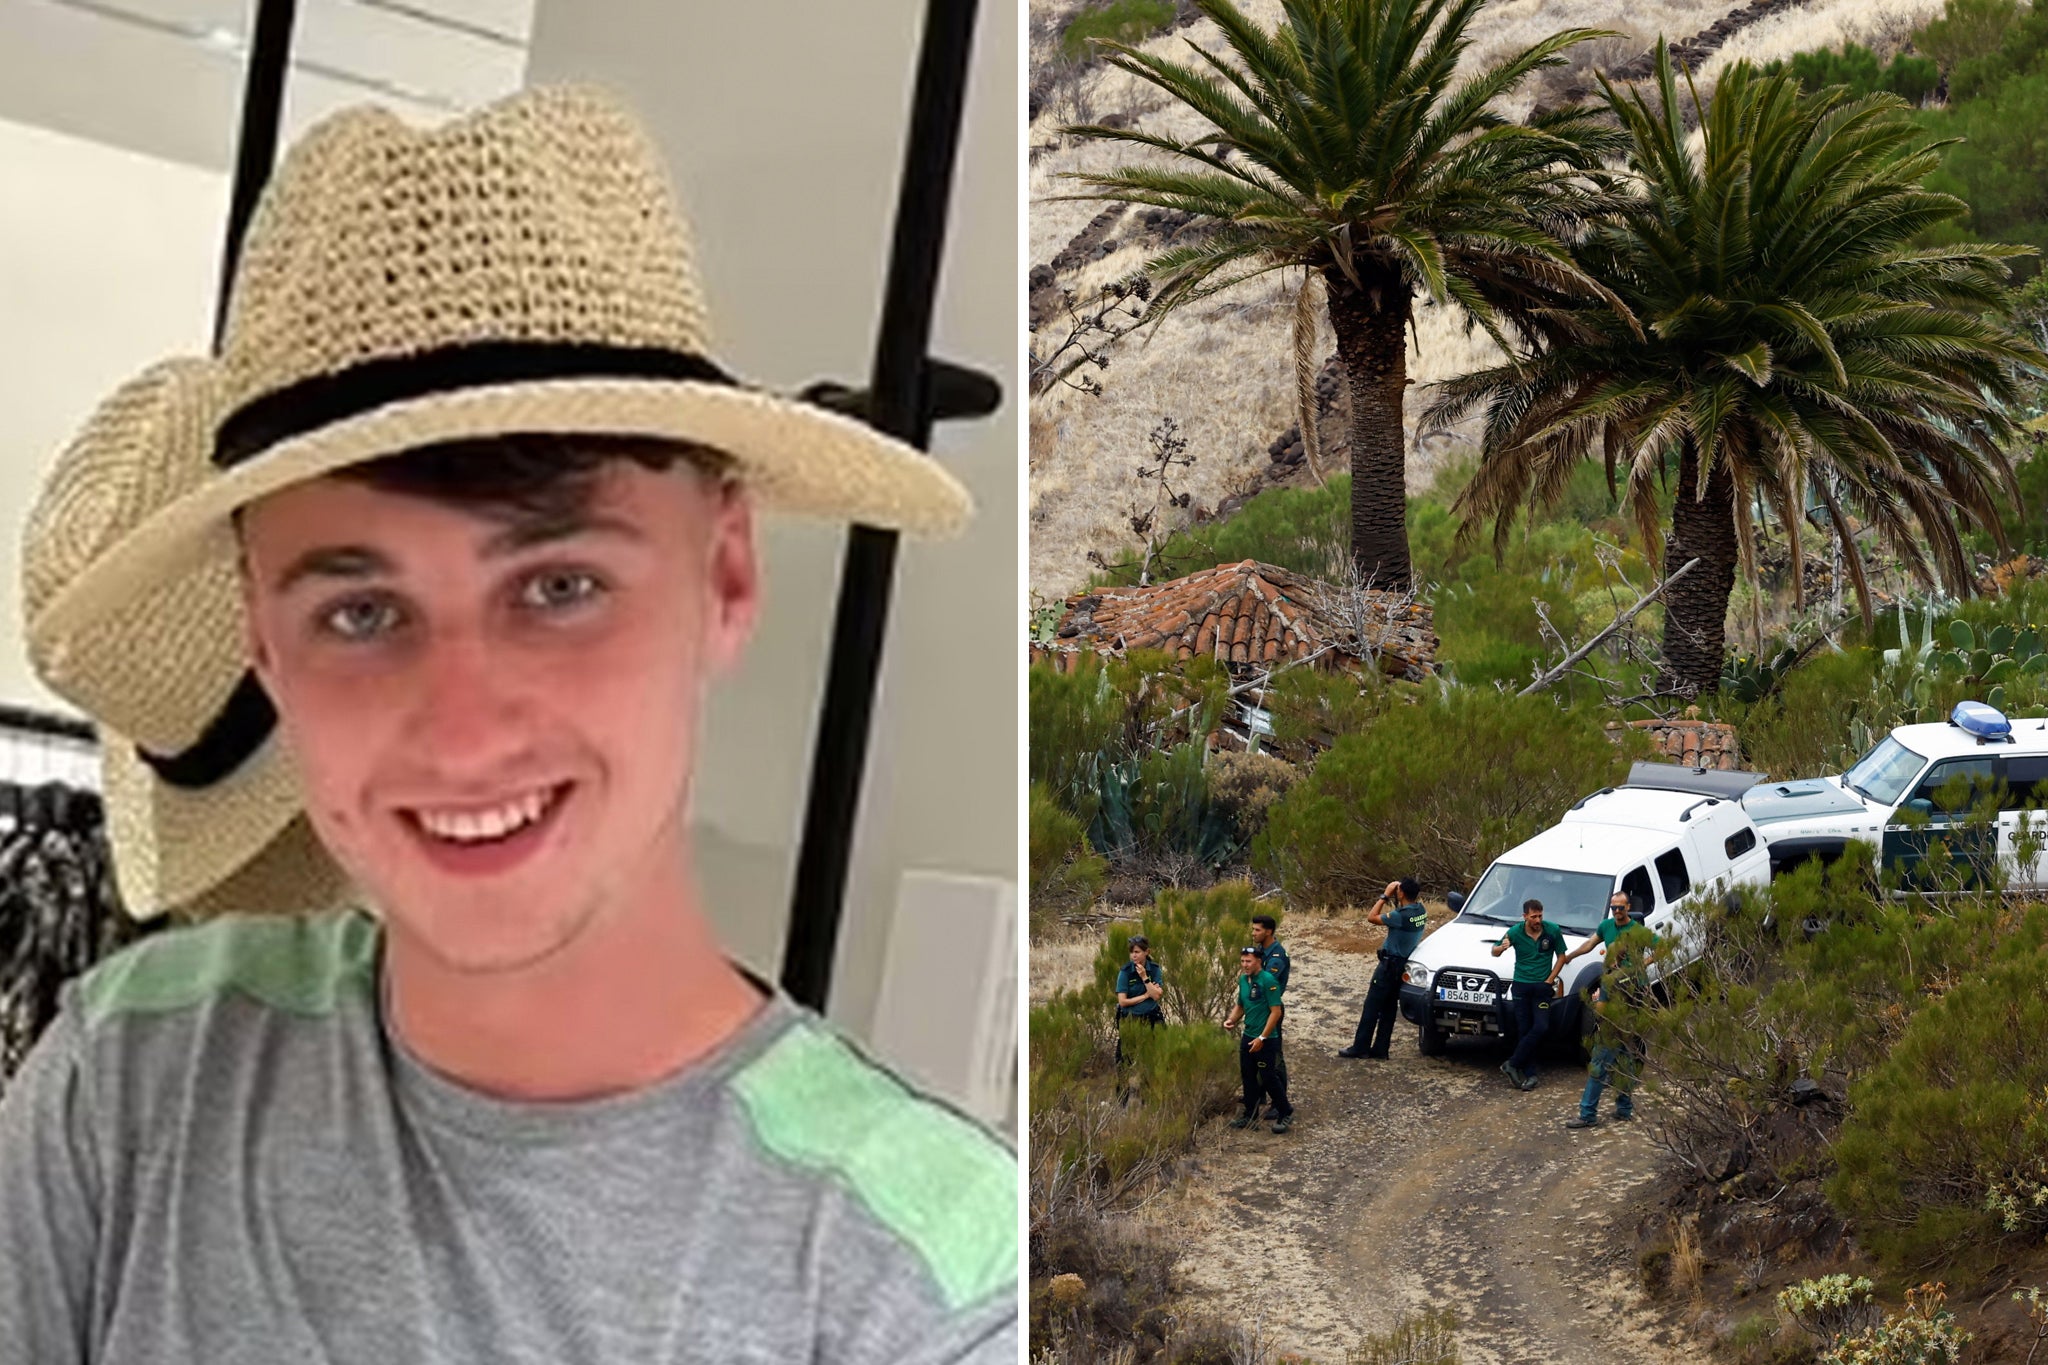 Jay Slater has been missing since 17 June in the Rural de Teno national park